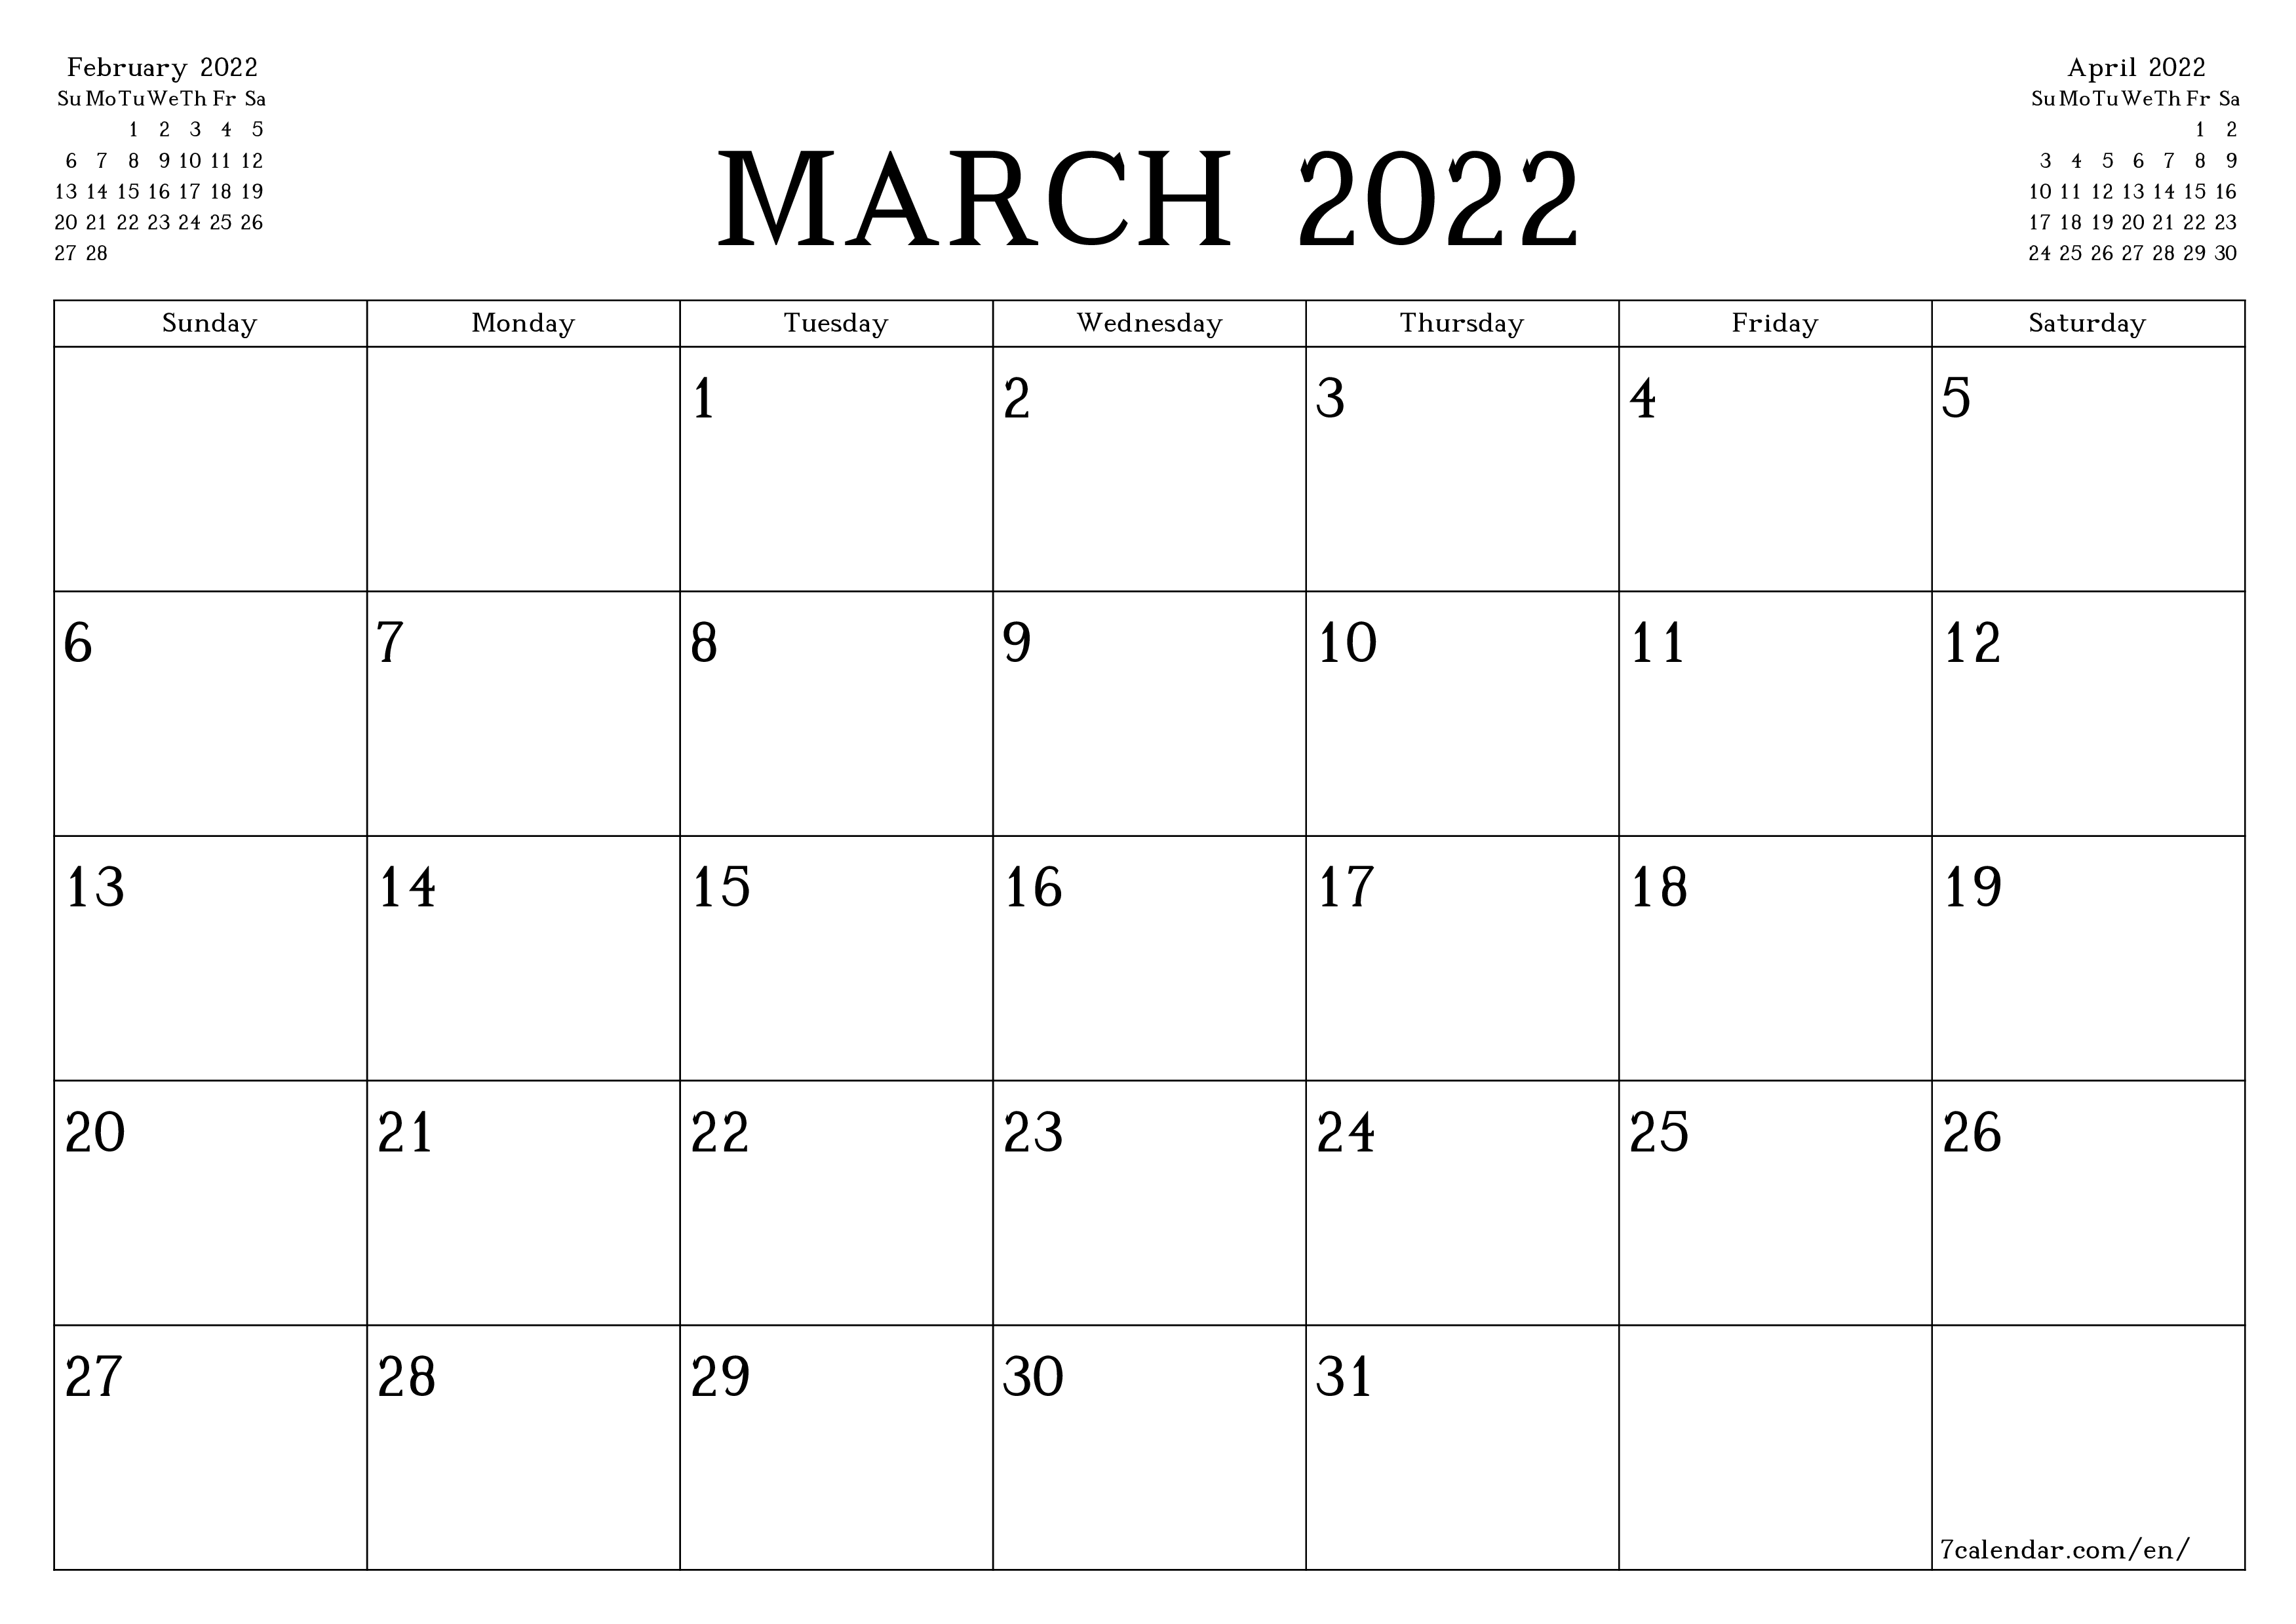 Monthly Calendar For 2022 March 2022 Free Printable Calendars And Planners, Pdf Templates - 7Calendar